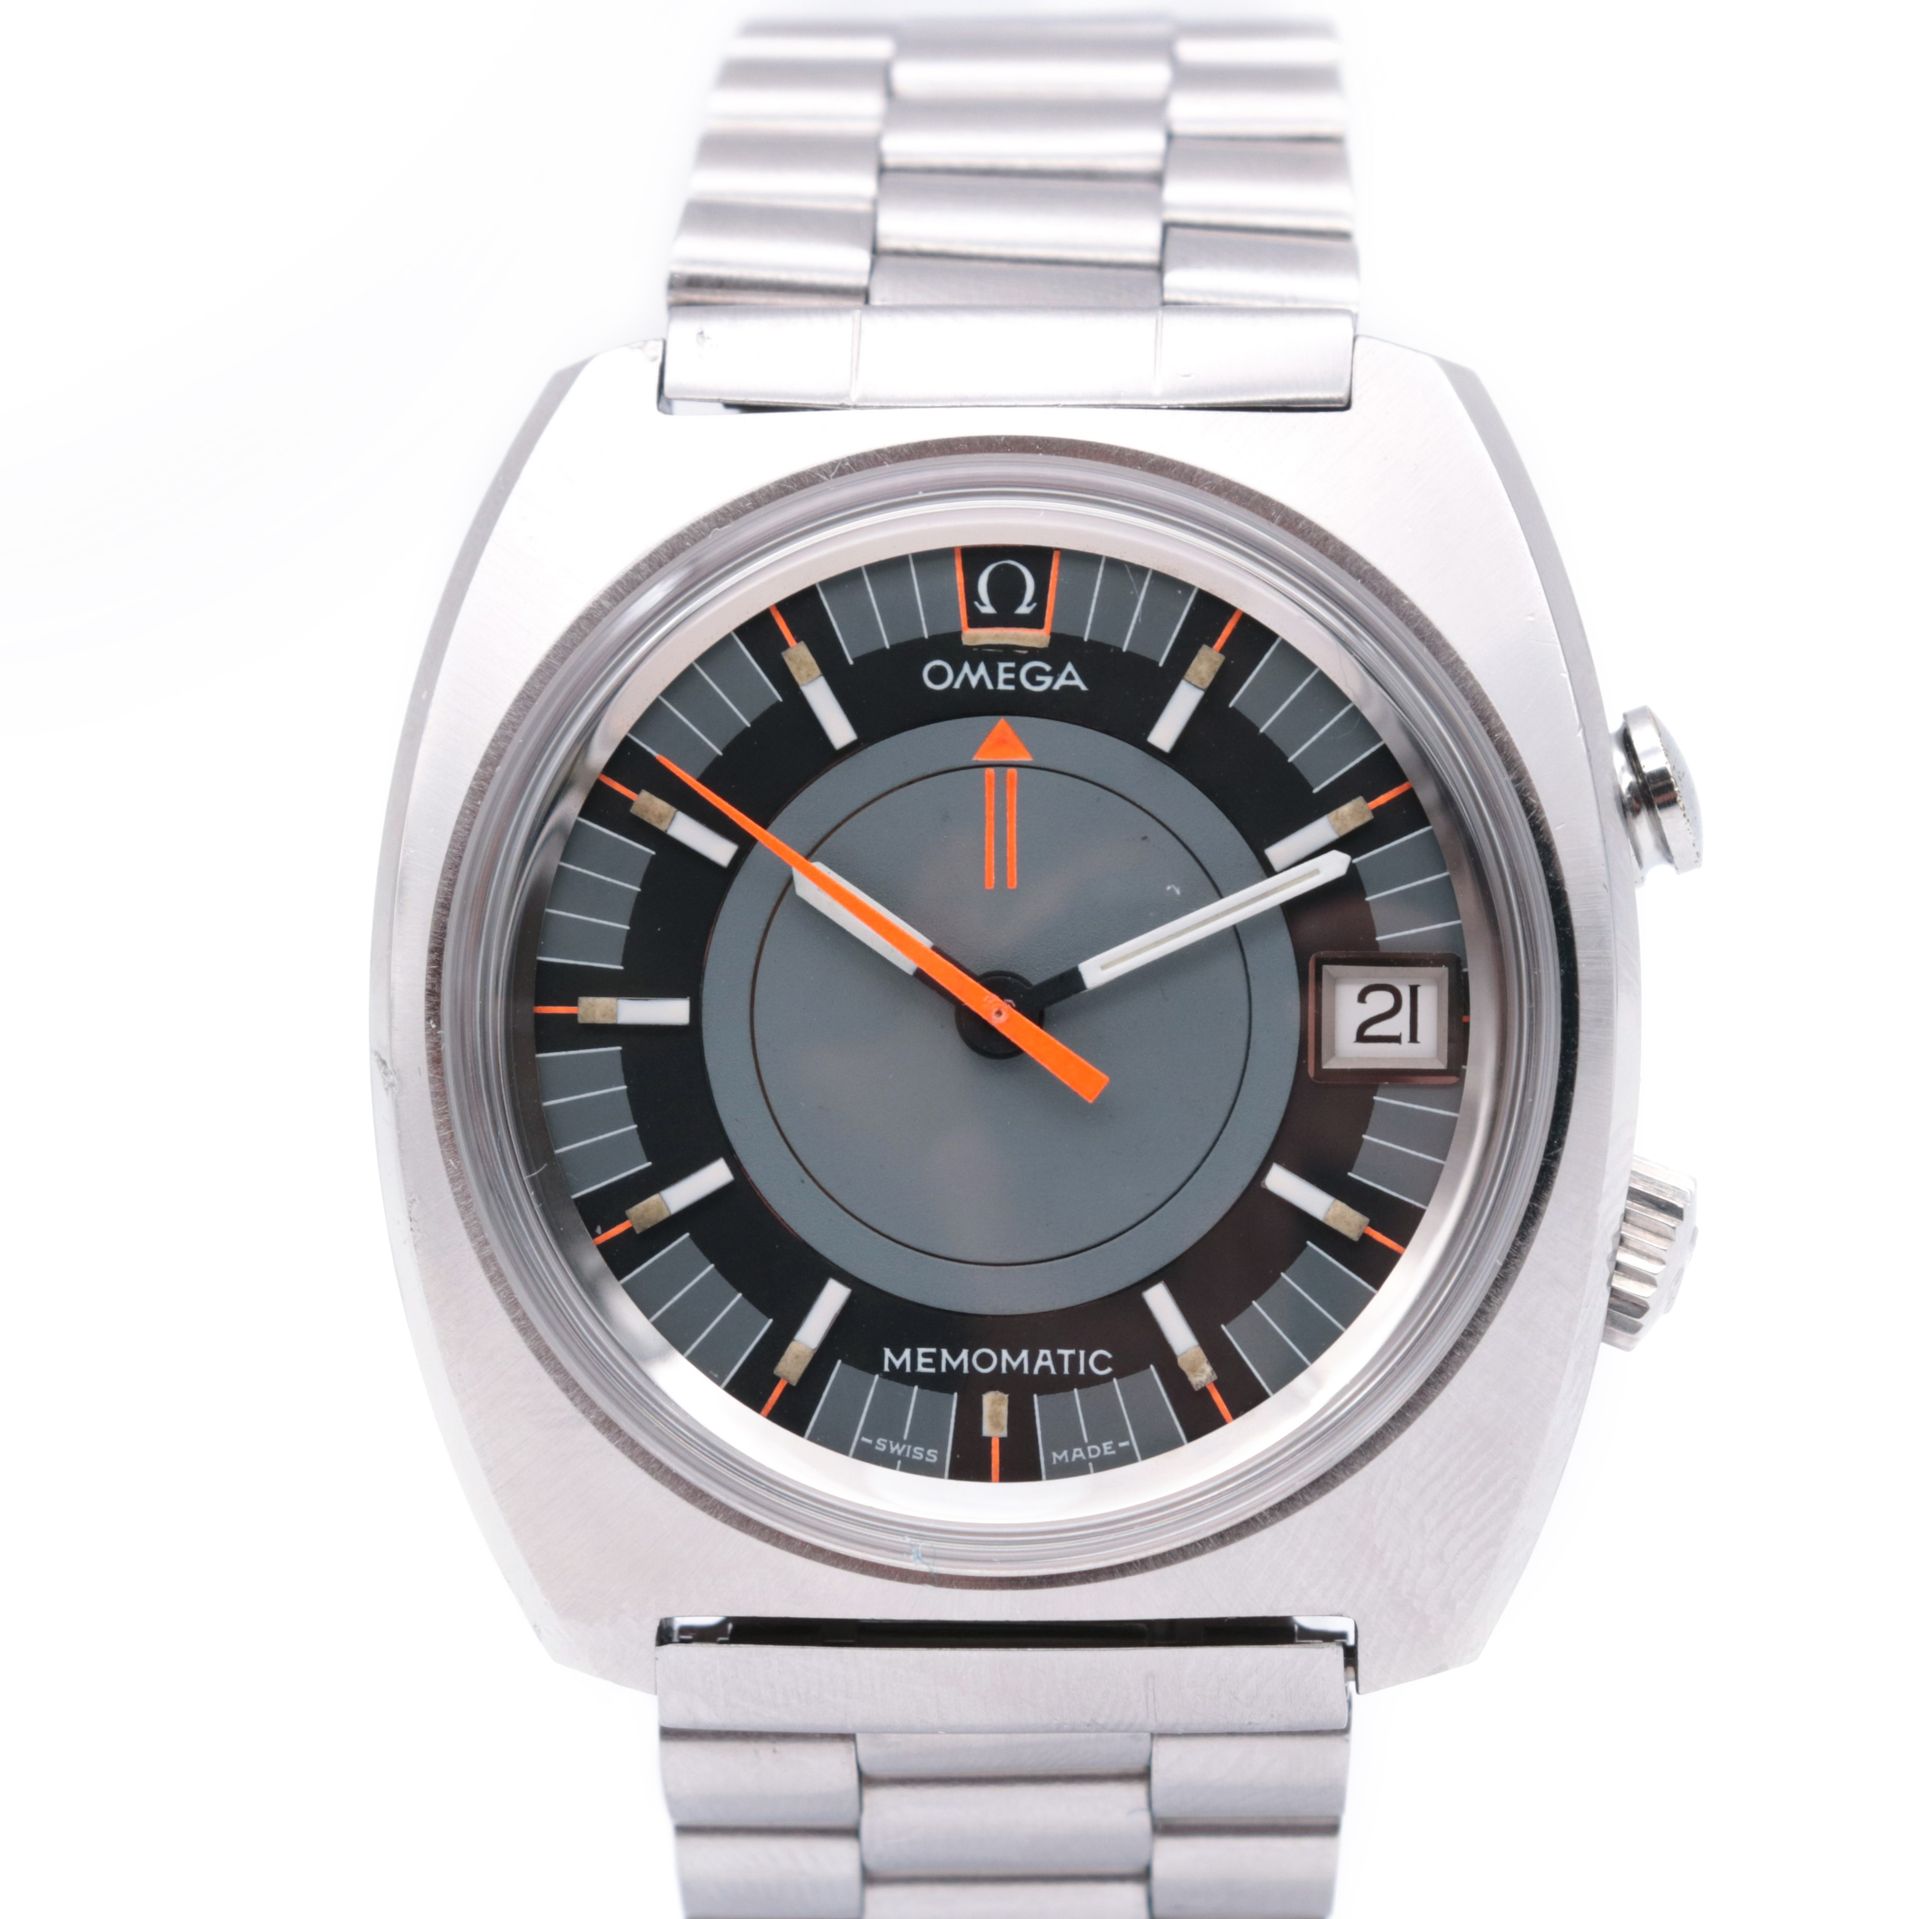 Montre Omega, Seamaster Memomatic Circa 1969

The square steel case, signed

The&hellip;